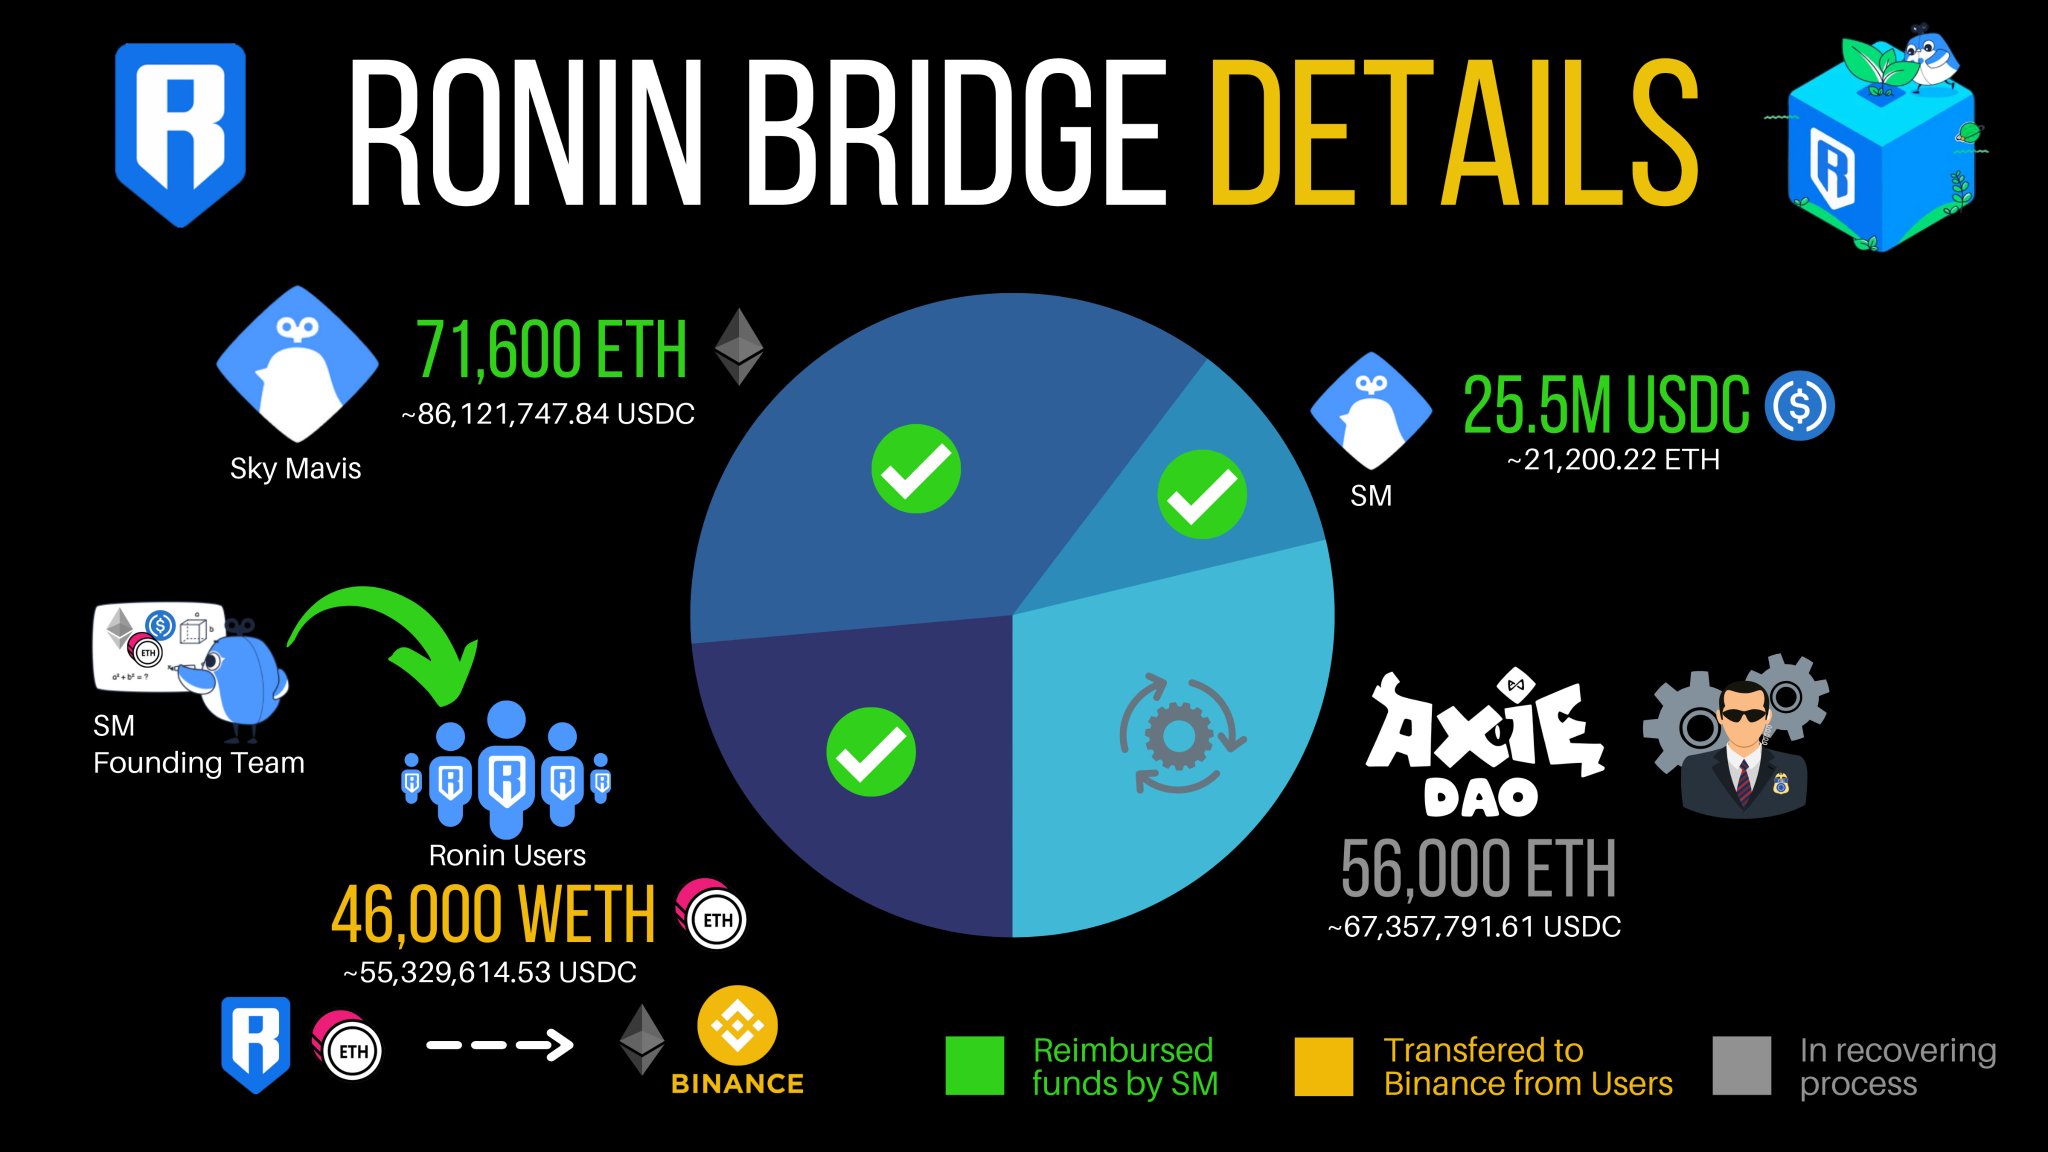 RT zioaxie: The Ronin Bridge is now Open! 👀⚡️ @SkyMavisHQ has reopened the Ronin Bridge & ensured all user funds.   This is a great moment for @AxieInfinity!🙌  Thank you so much for all the amazing work you're doing!🙏❤️  Here is the full article, please read it!👇 [roninblockchain.substack.com] [twitter.com] [pbs.twimg.com]